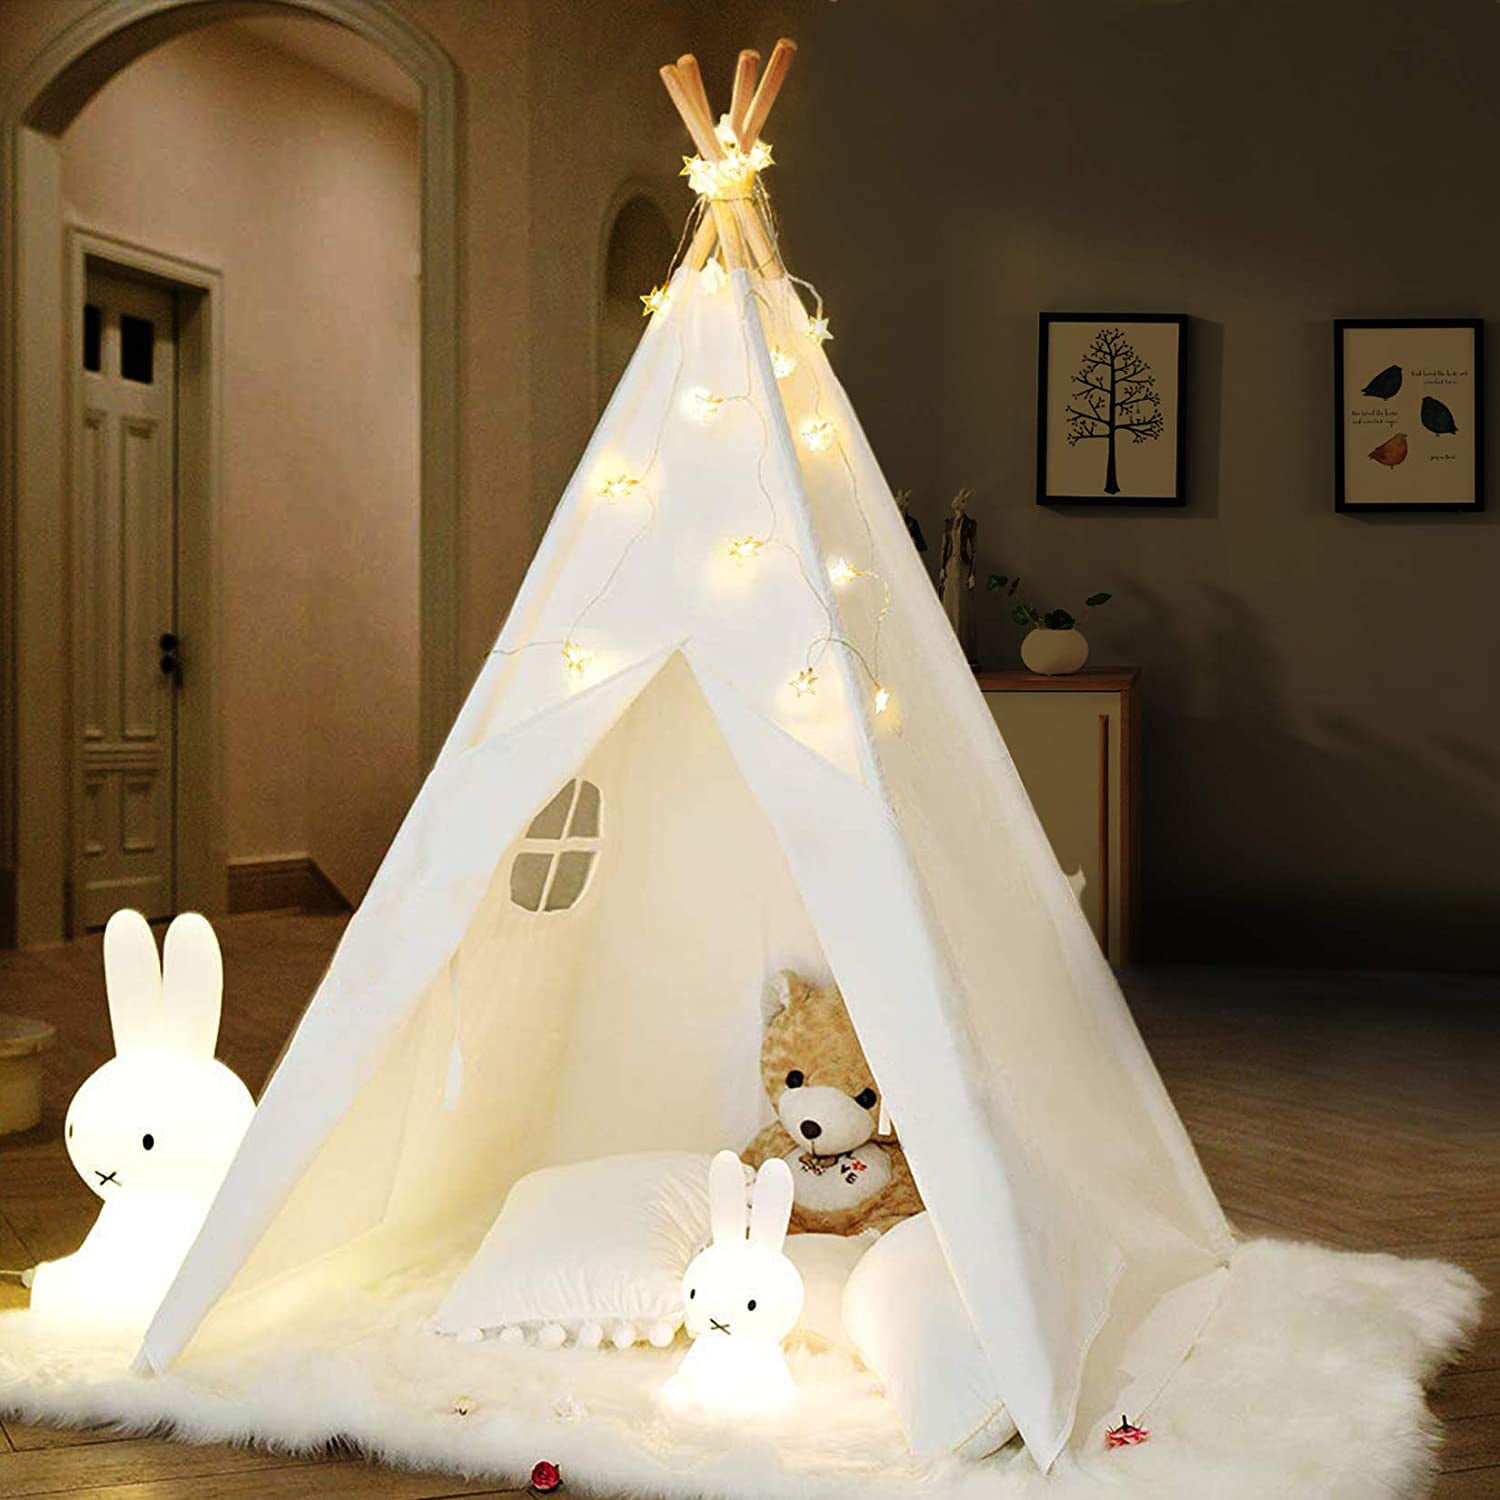 Kids Teepee Children Large Canvas Play Tent Garden Indoor Toy Gift for Boy Girl 